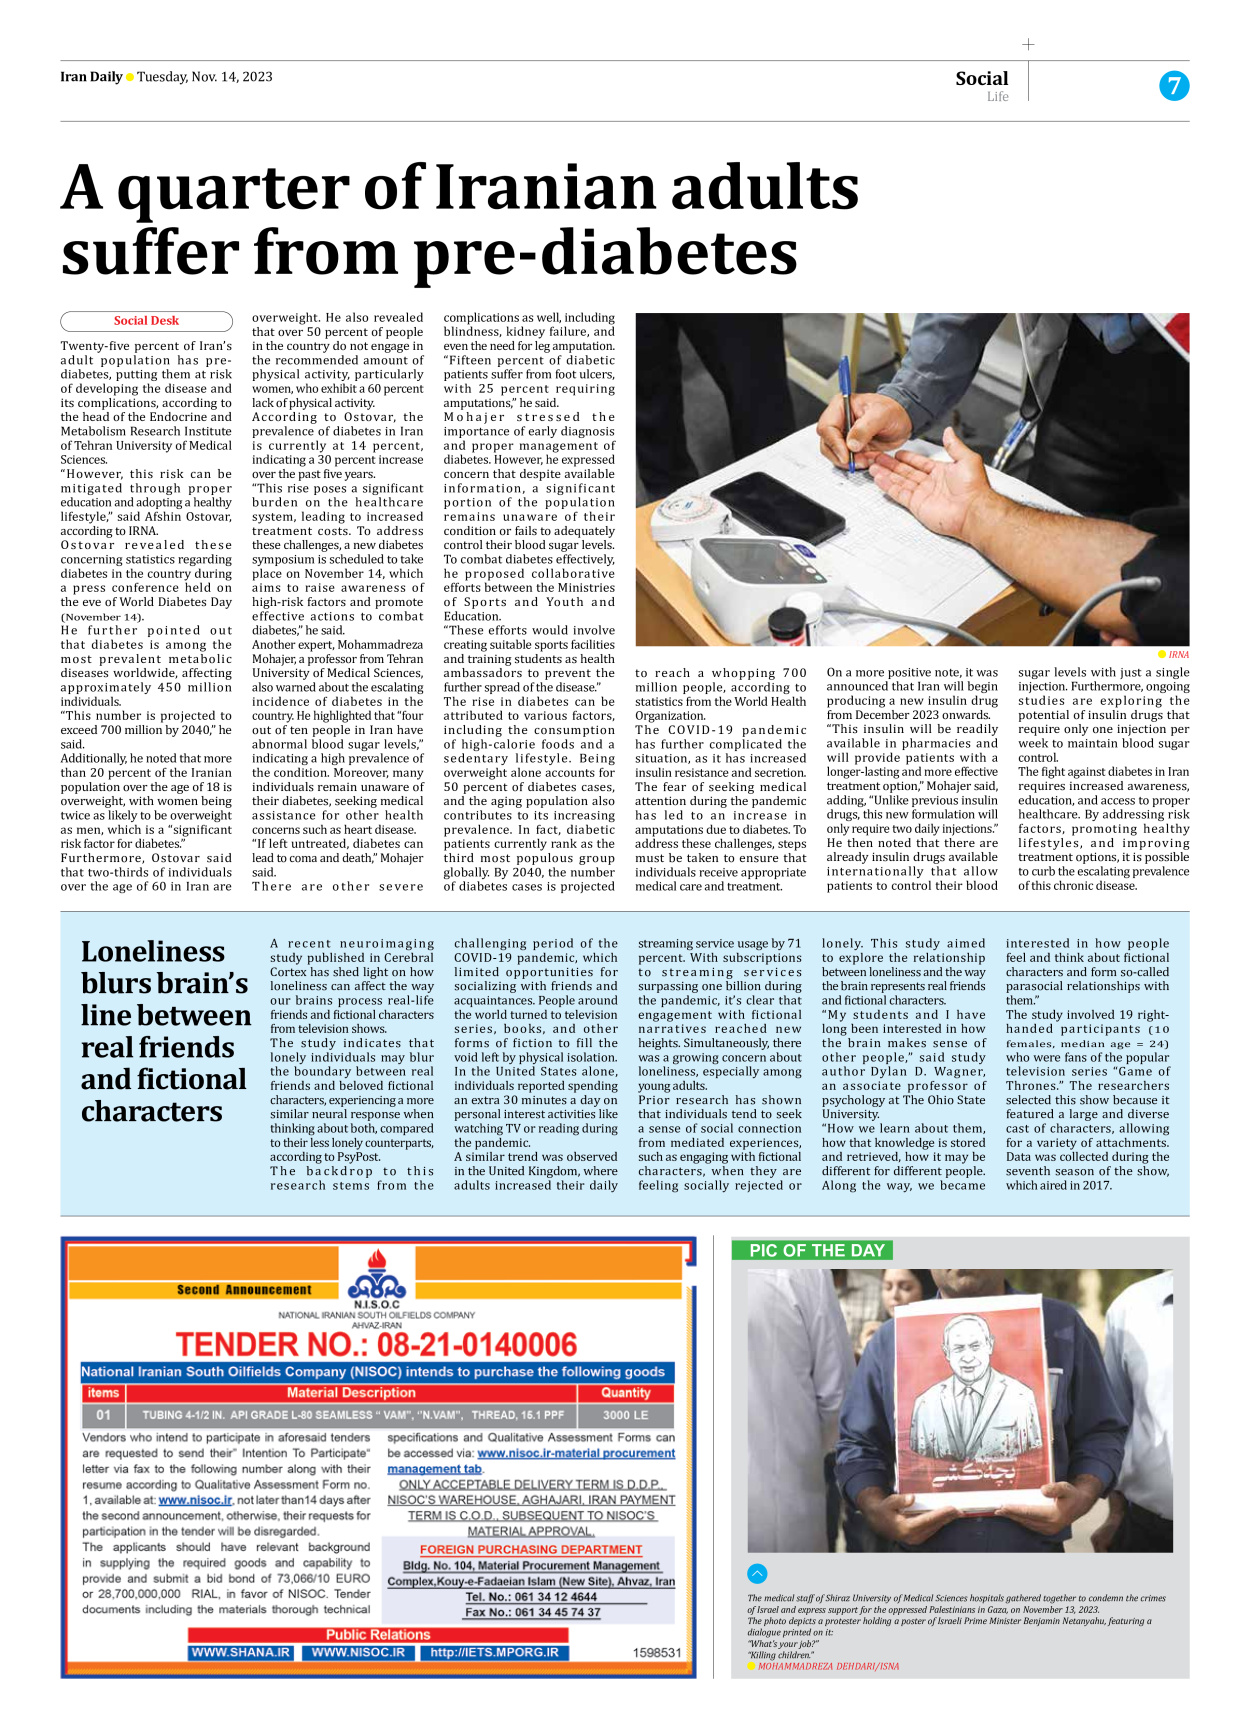 Iran Daily - Number Seven Thousand Four Hundred and Thirty Four - 14 November 2023 - Page 7